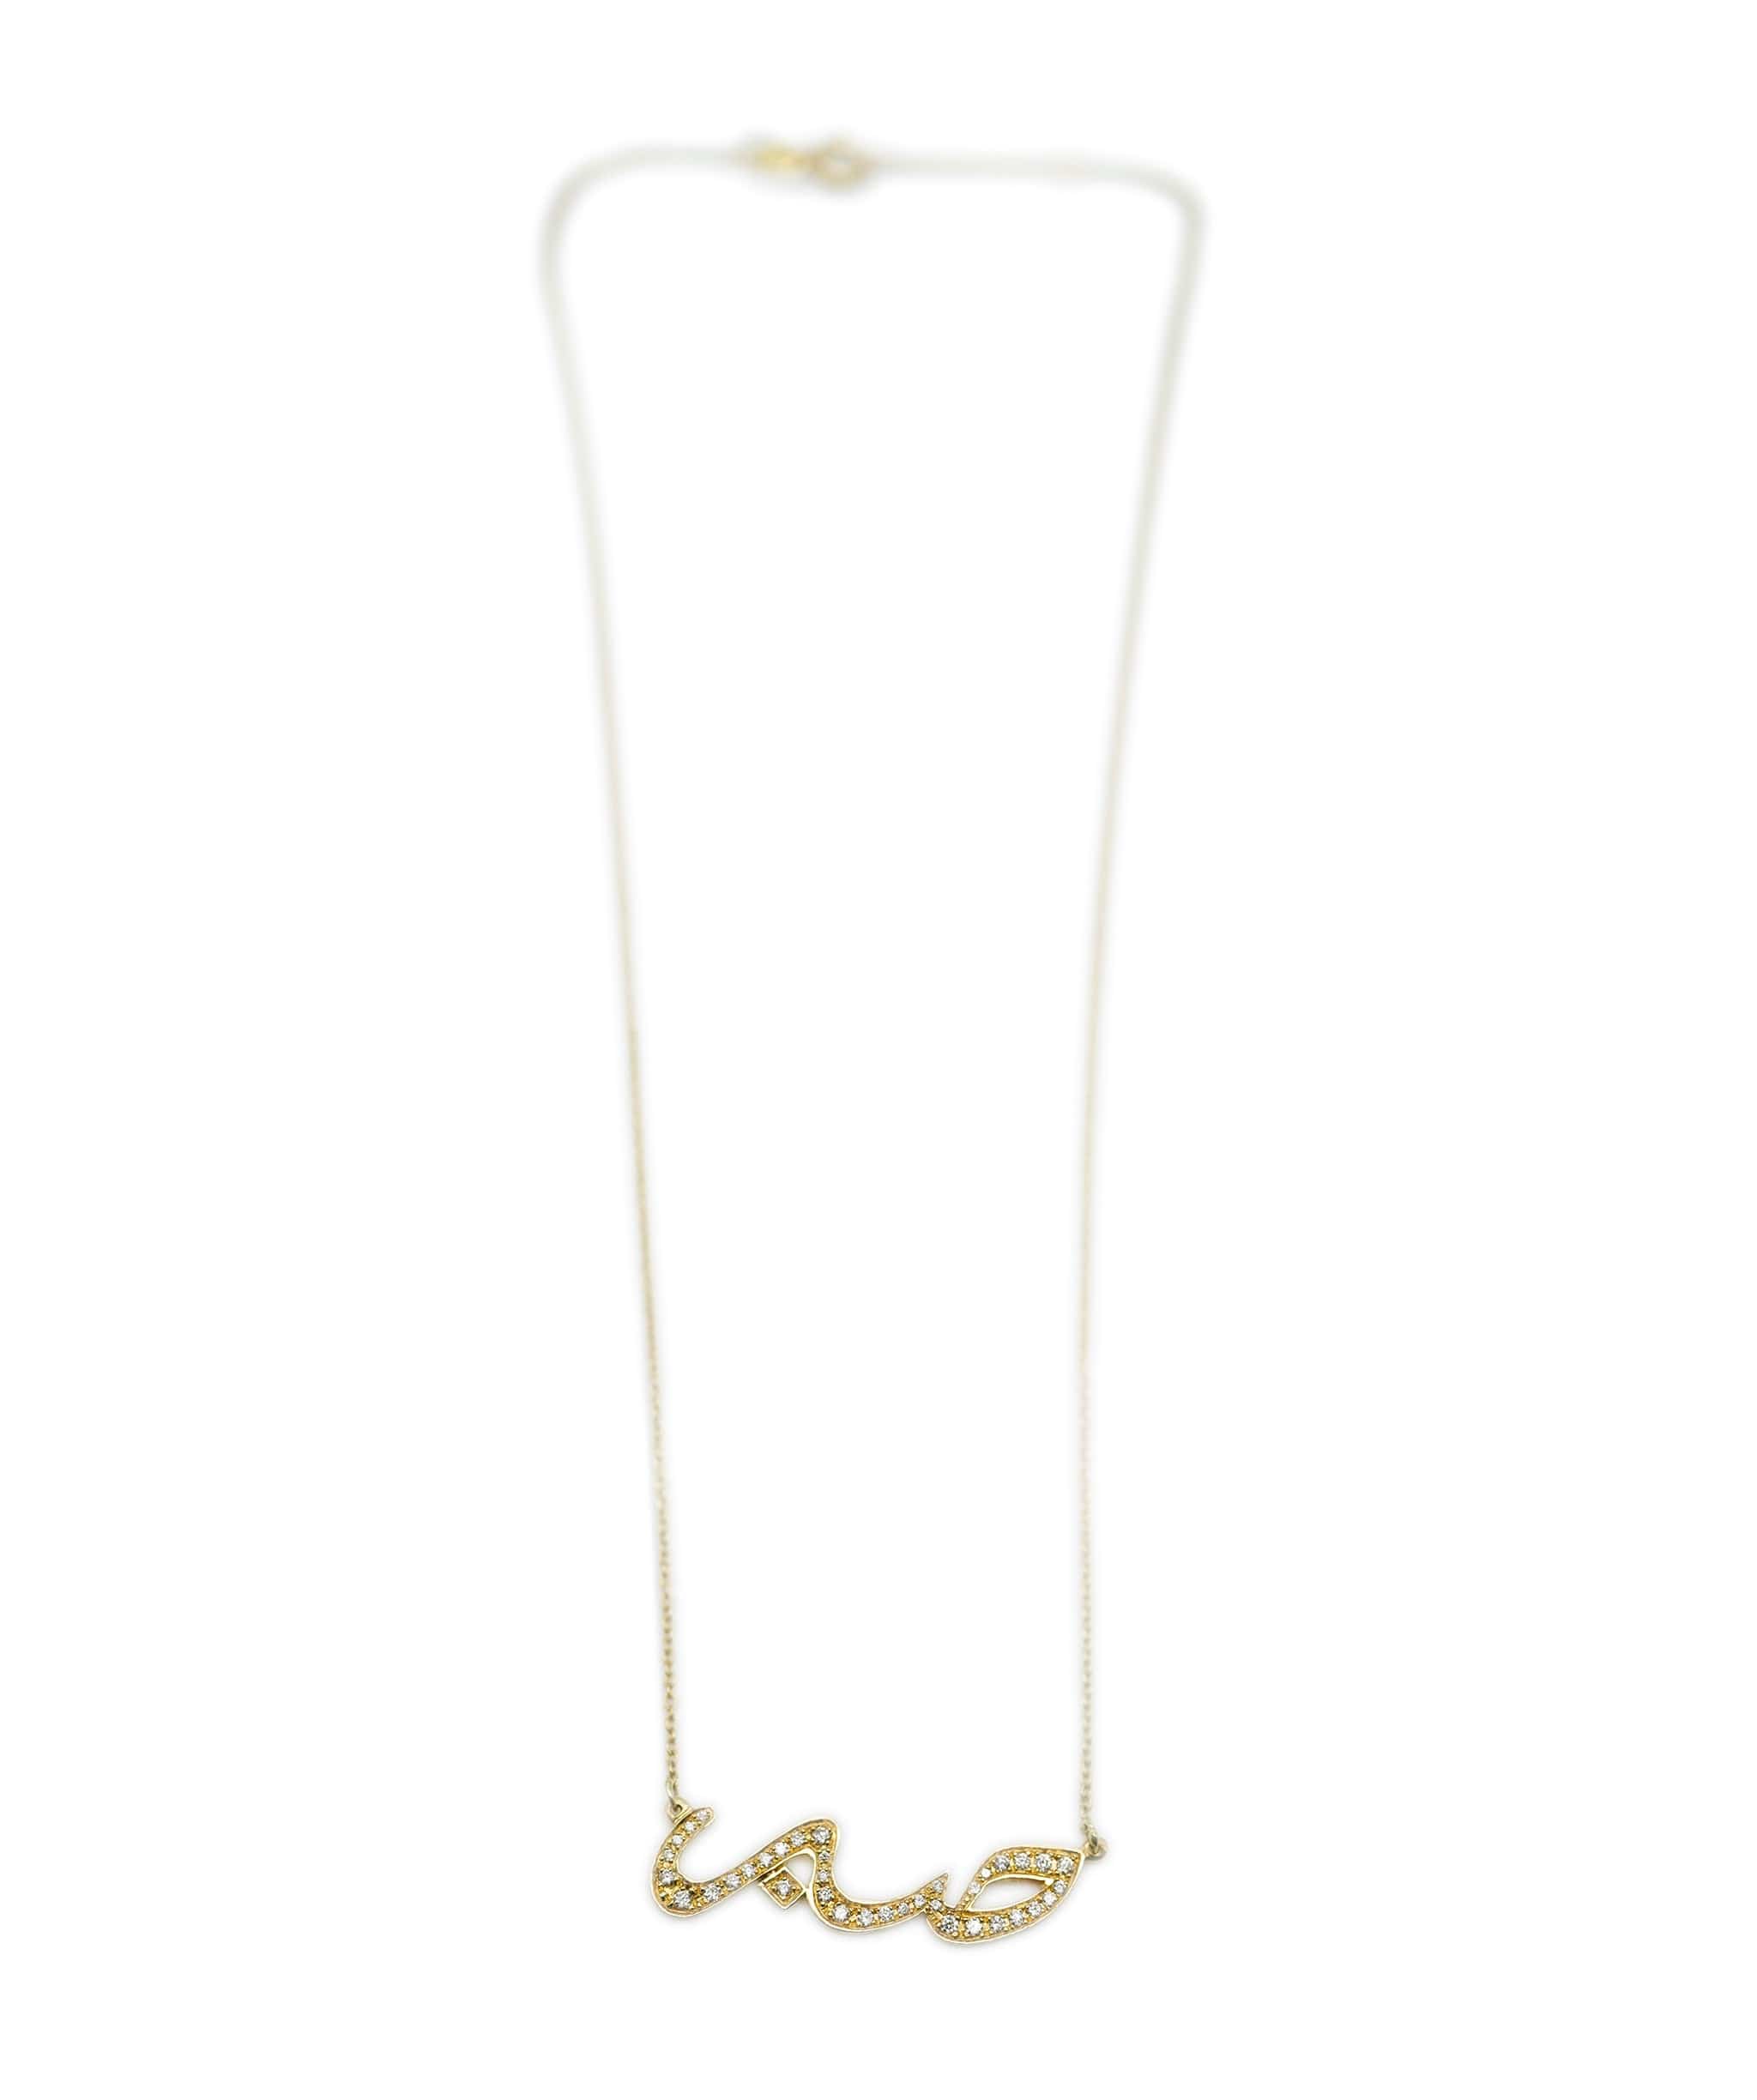 Luxury Promise Patience ‘SABR’ in Arabic Diamond Necklace Yellow gold
 ASC1926